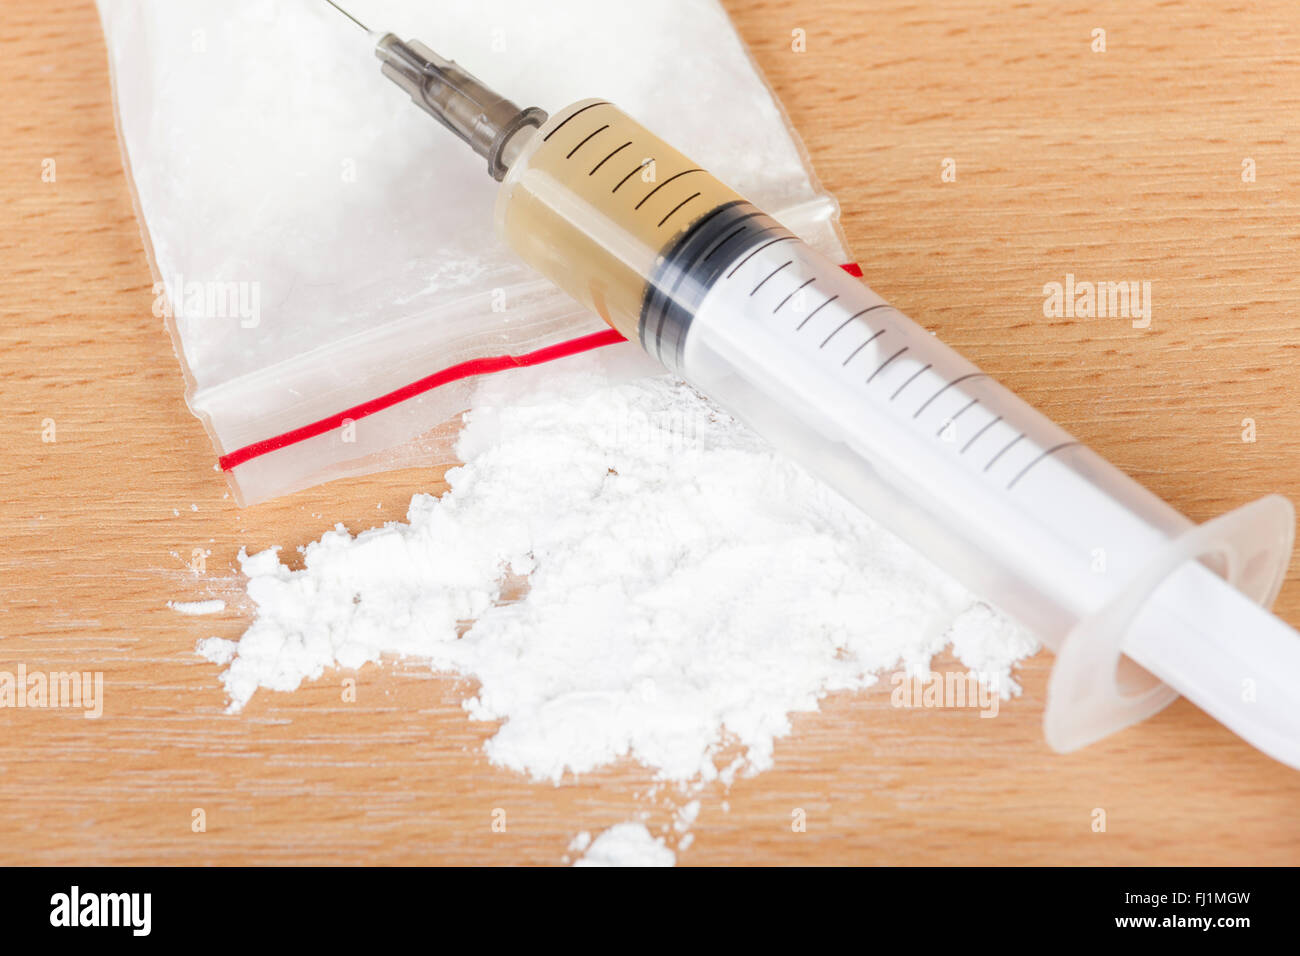 Loaded heroin syringe laying across a spilled bag of heroin on a table Stock Photo